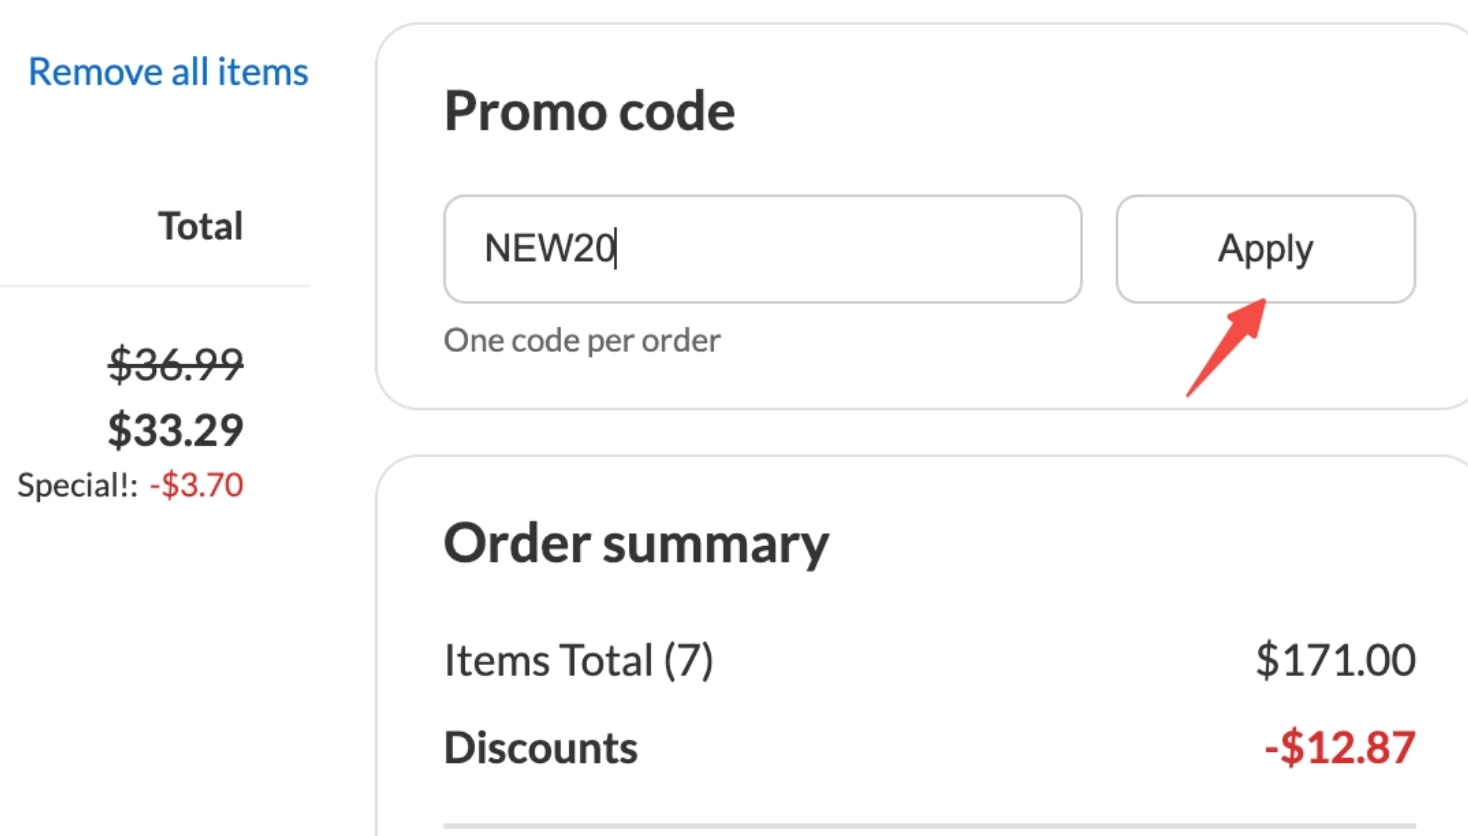 Step 3: When checking out at abchome.com, paste the discount code into the specified promotional code box.